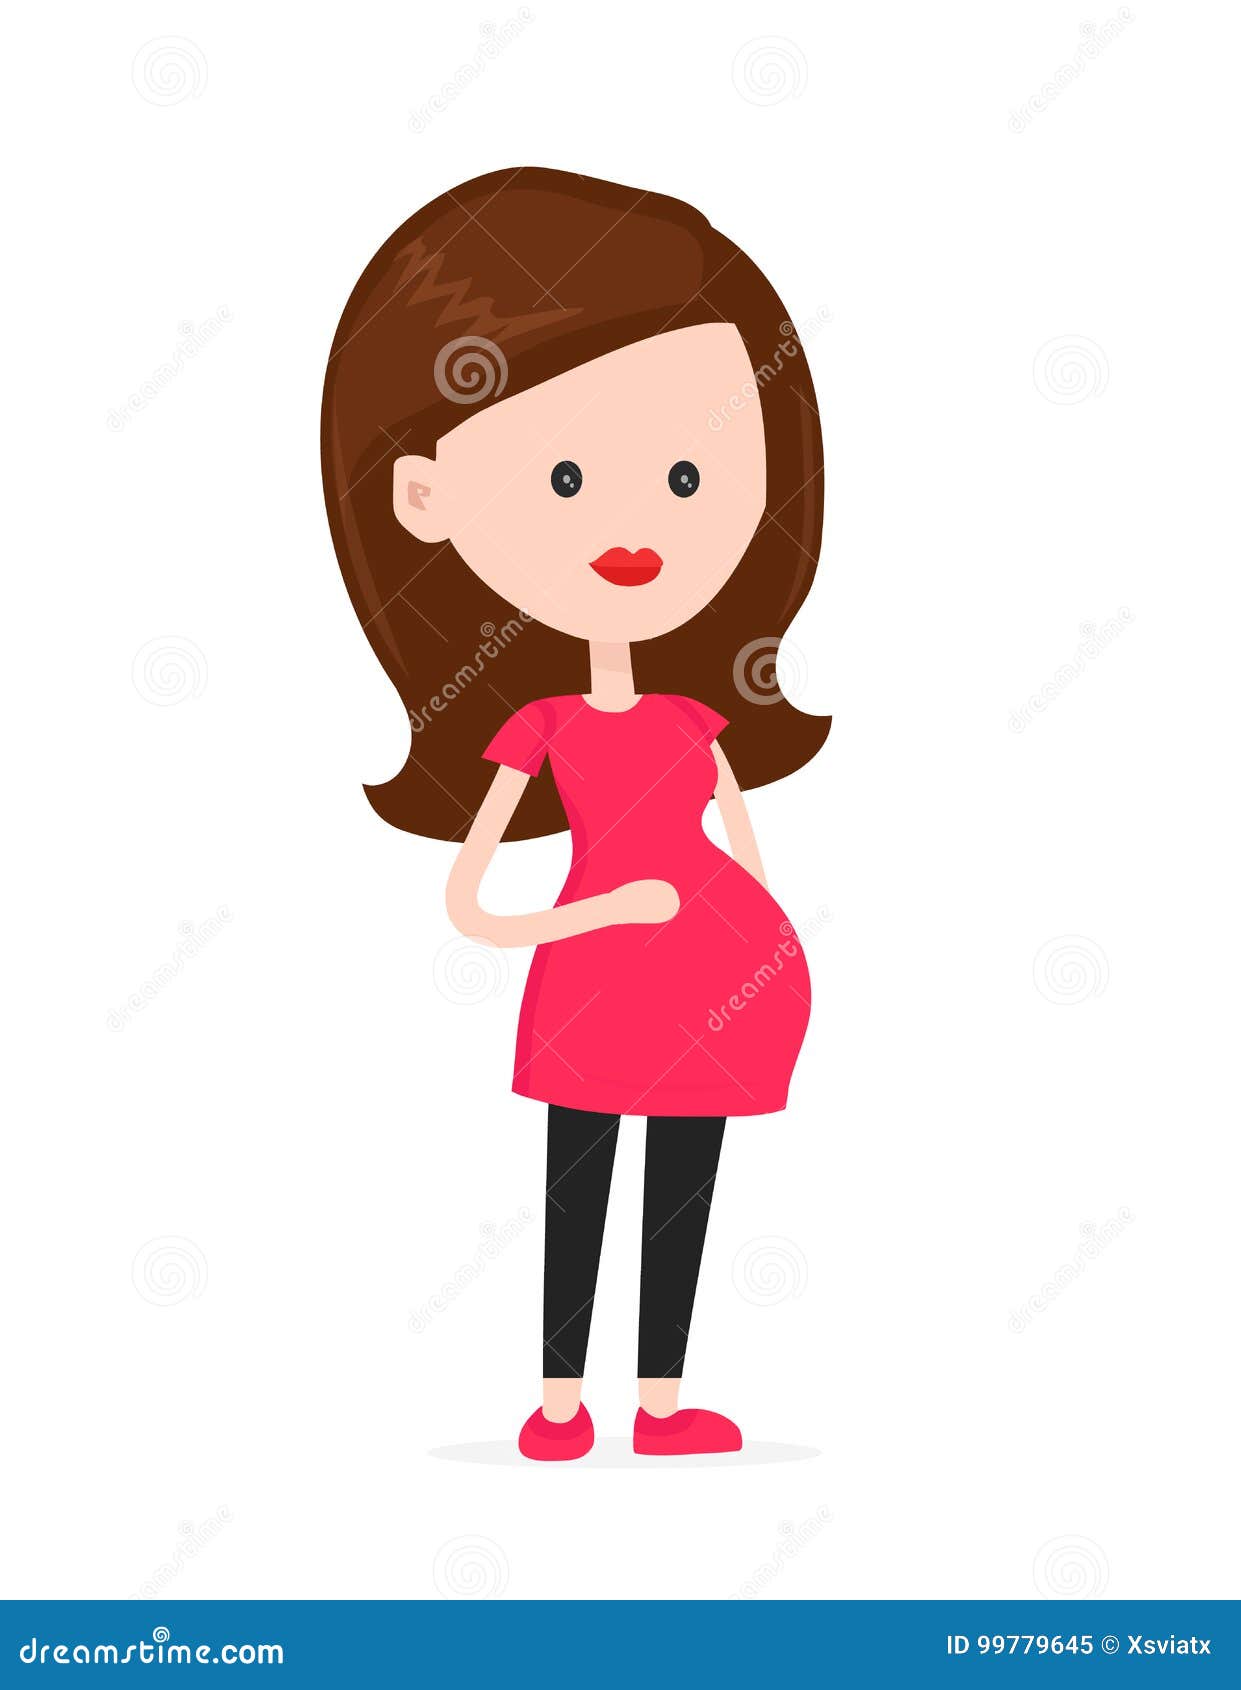 Cute Smaling Happy Pregnant Woman. Stock Vector - Illustration of life ...